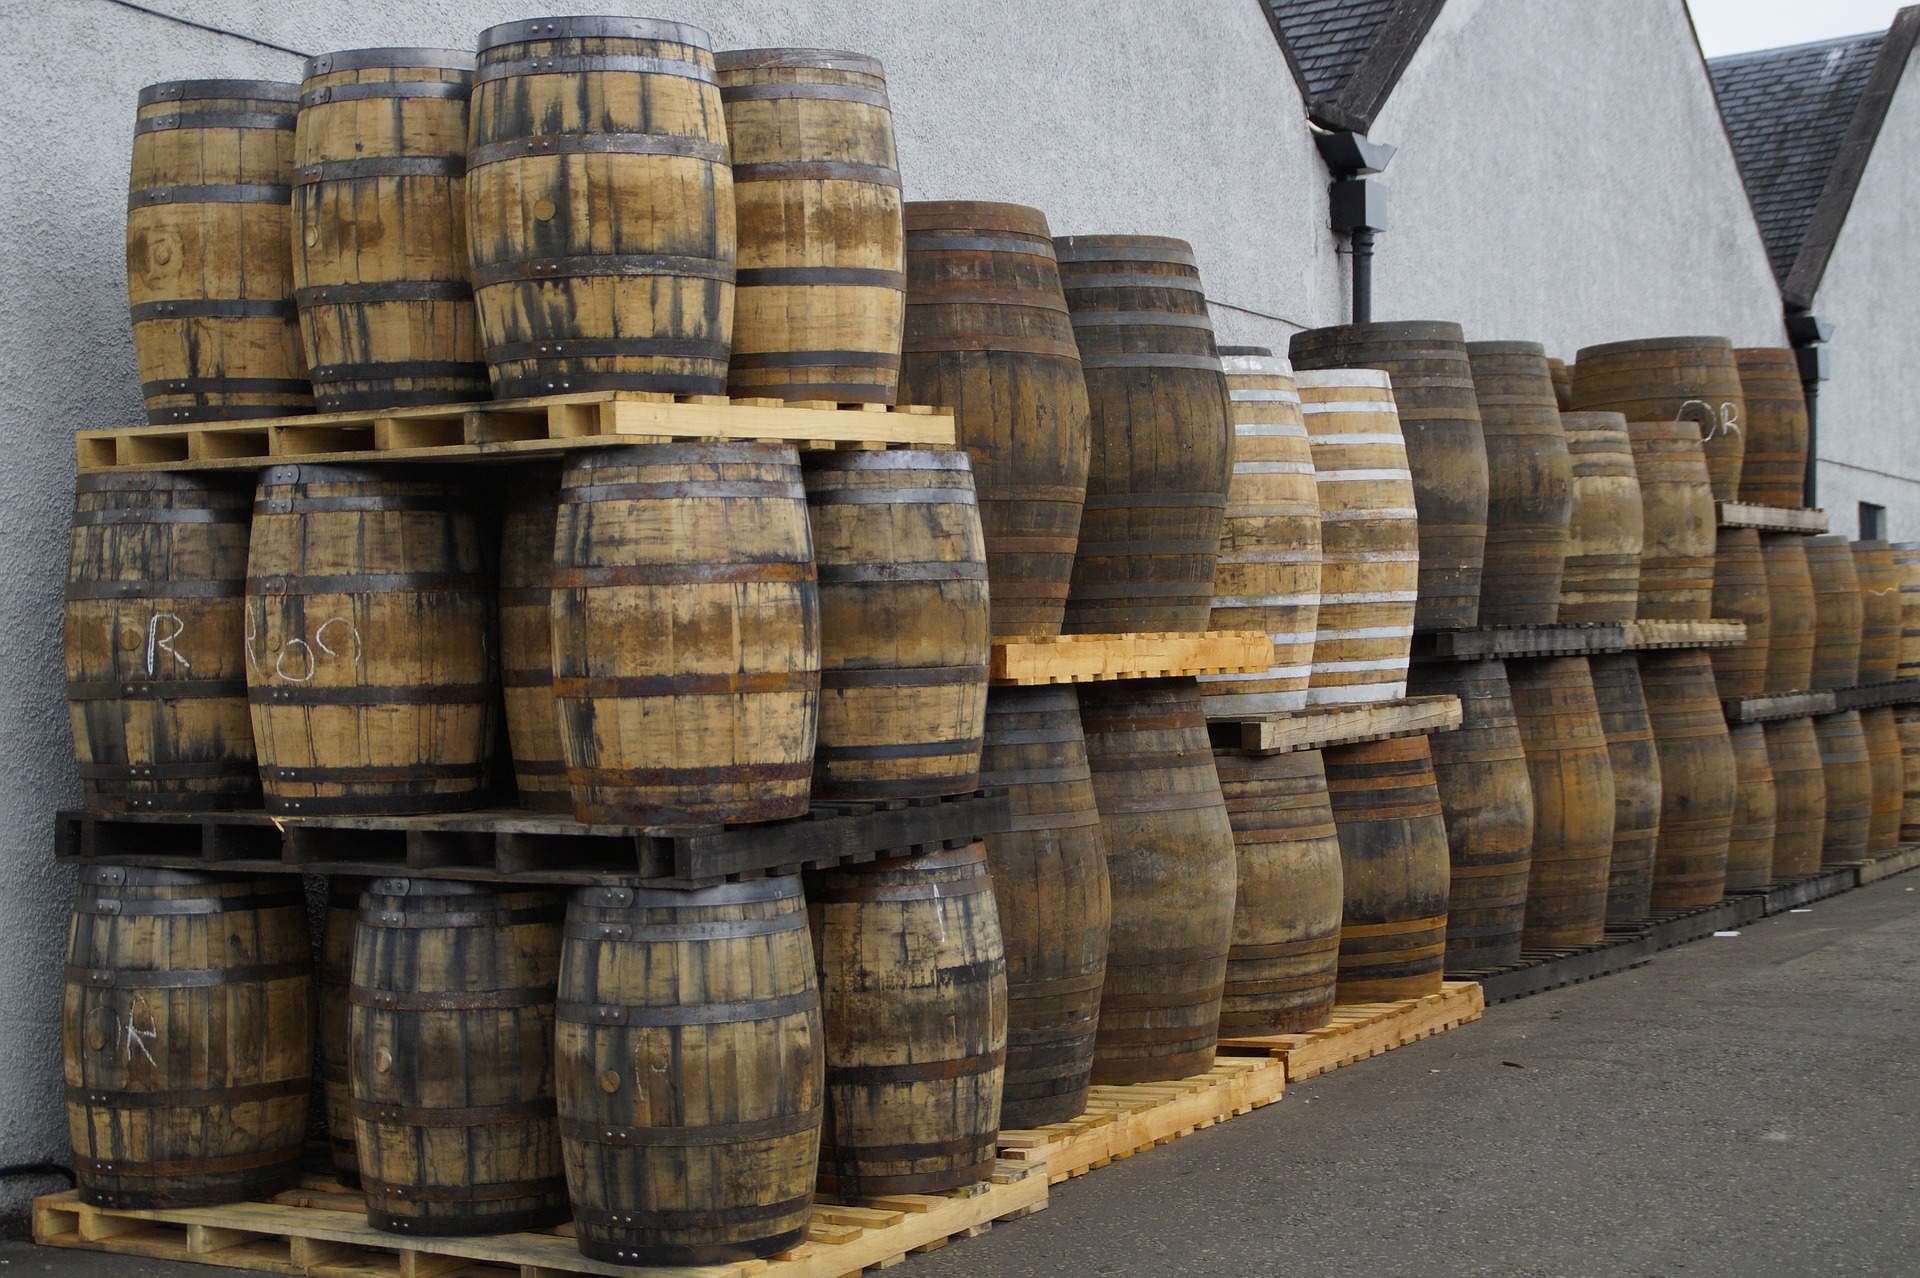 A collection of whiskey barrels